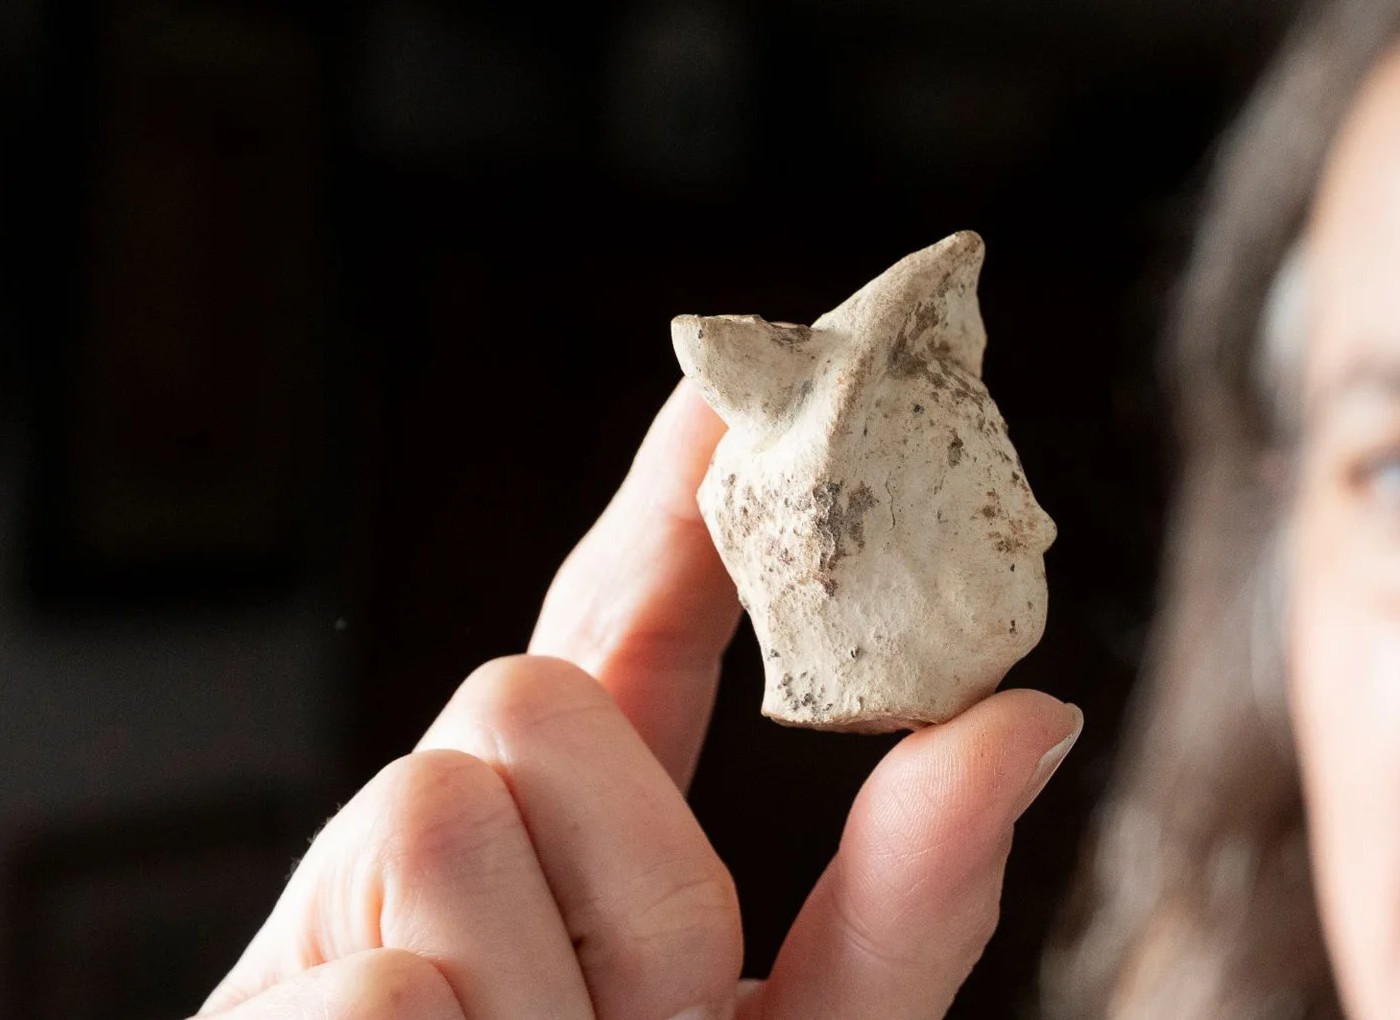 A woman holds the head of a Roman clay figurine depicting the god Mercury recently found at the archaeological site Smallhythe in the English town of Kent.